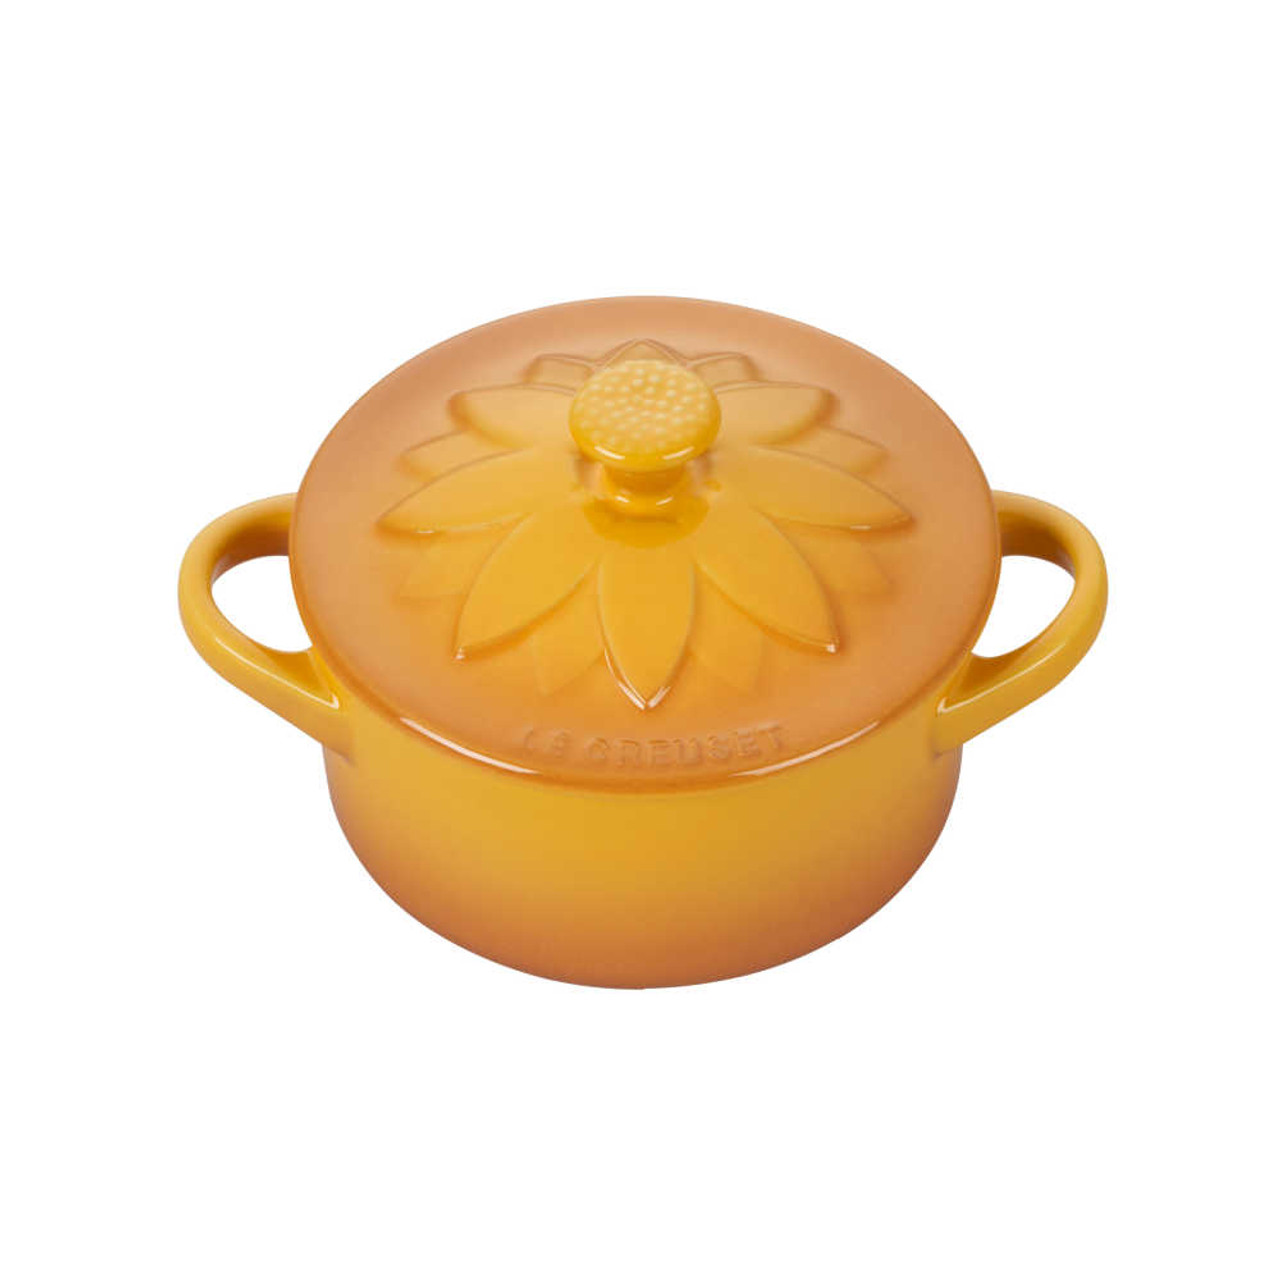 https://cdn11.bigcommerce.com/s-hccytny0od/images/stencil/1280x1280/products/5332/23195/Le_Creuset_Mini_Cocotte_With_Flower_Lid_in_Nectar__04762.1680014191.jpg?c=2?imbypass=on